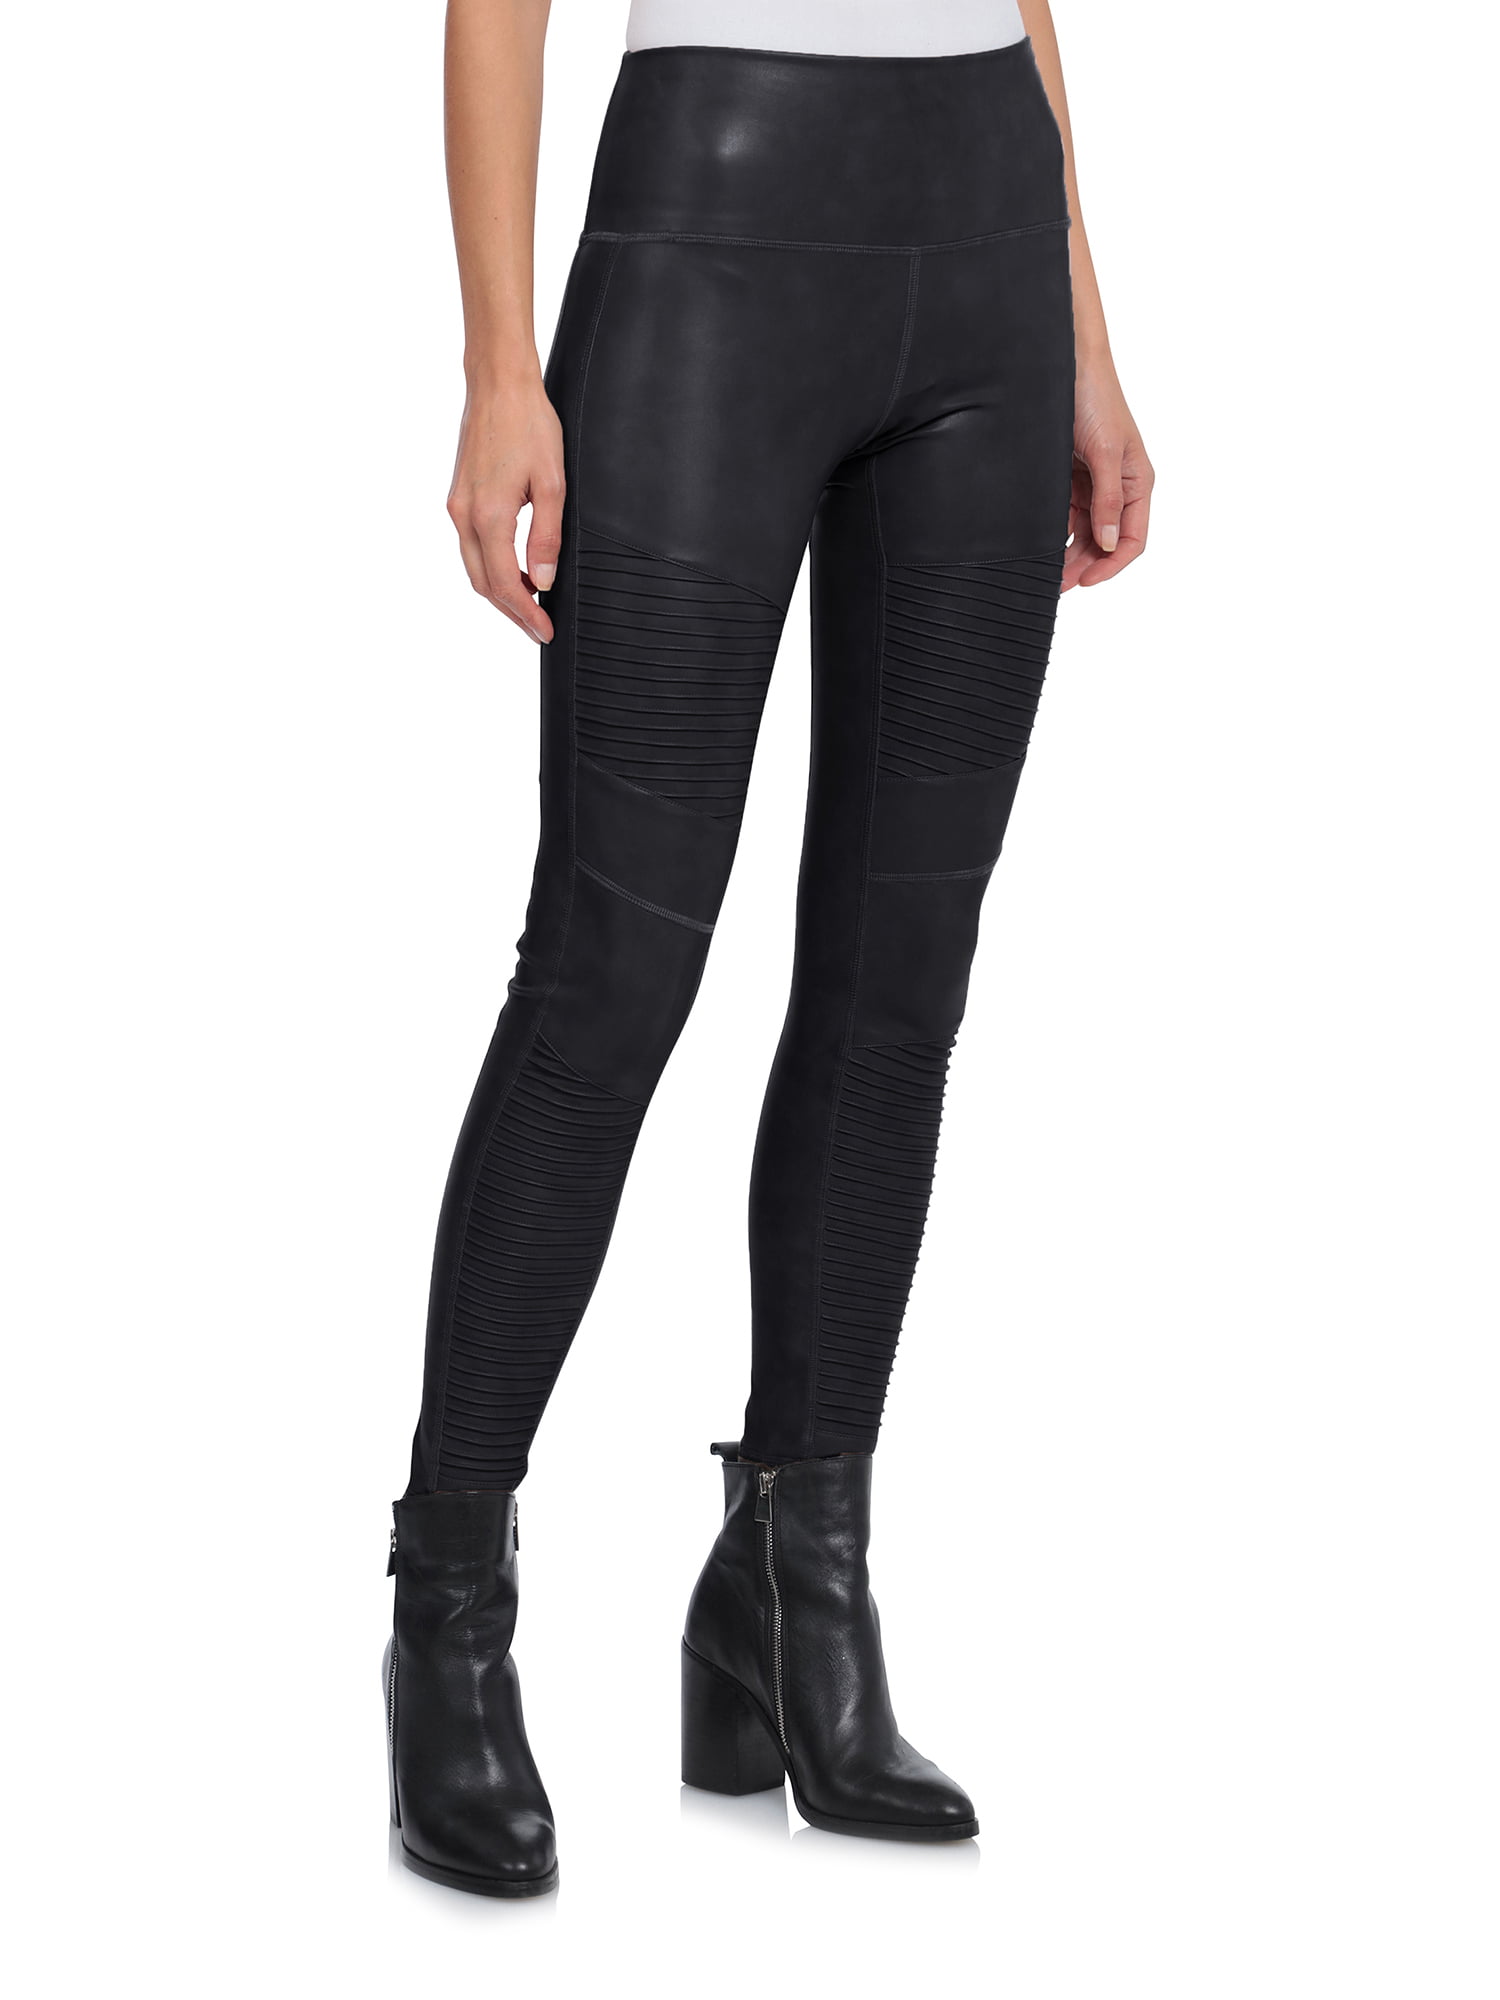 SPANX BLACK FAUX LEATHER MOTO LEGGINGS Sz XS - clothing & accessories - by  owner - apparel sale - craigslist